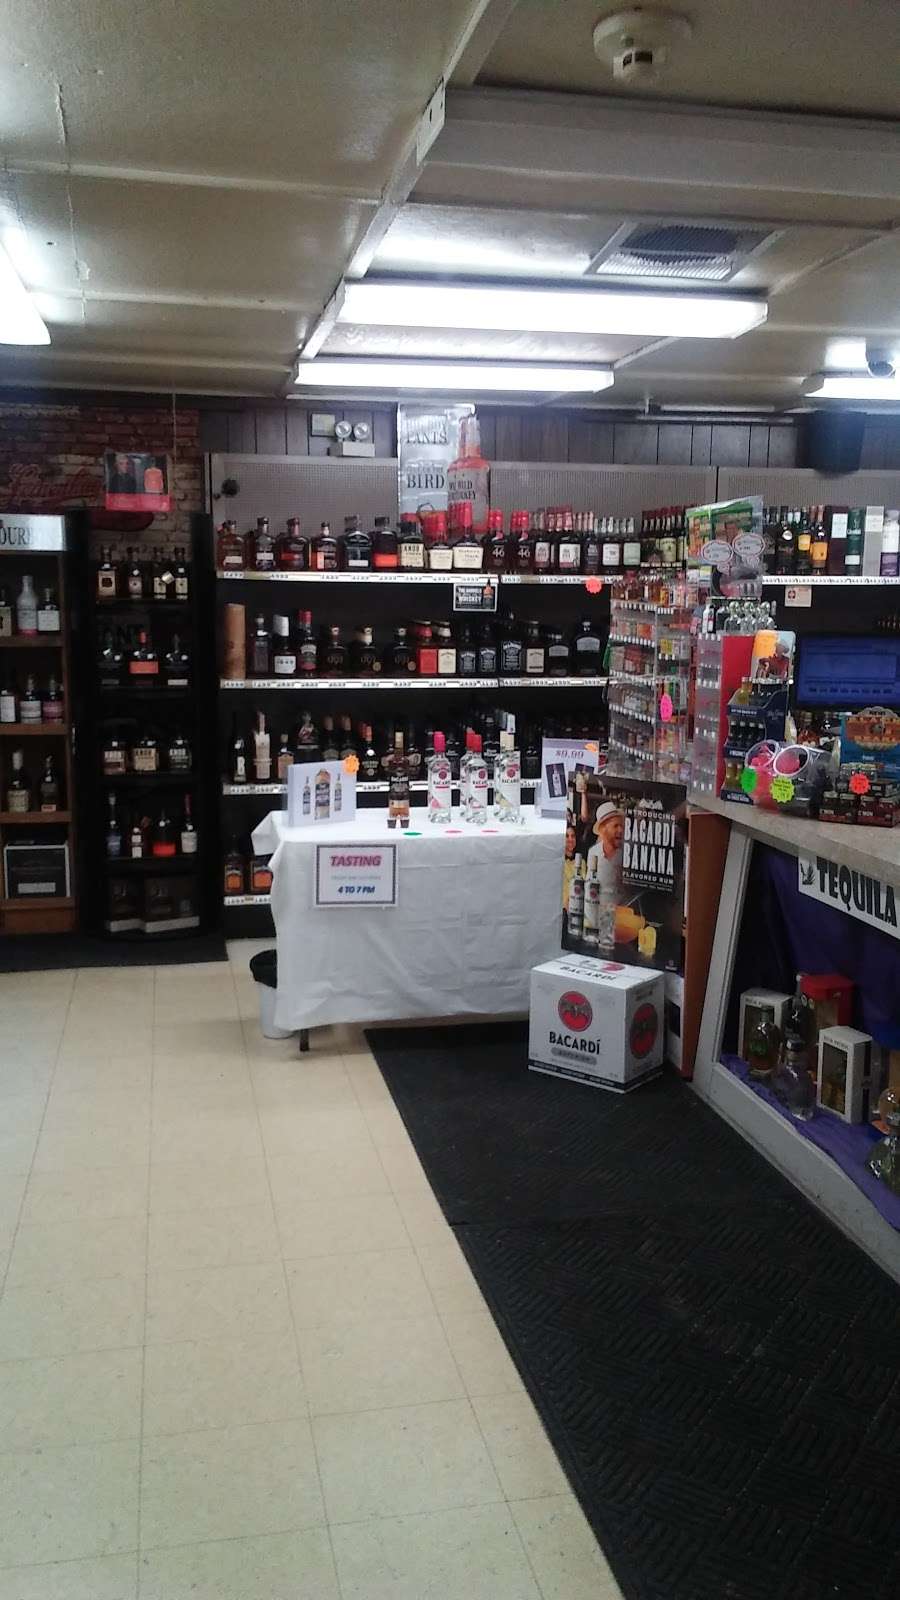 Mooresville Liquors | 335 S Indiana St, Mooresville, IN 46158, USA | Phone: (317) 831-7755